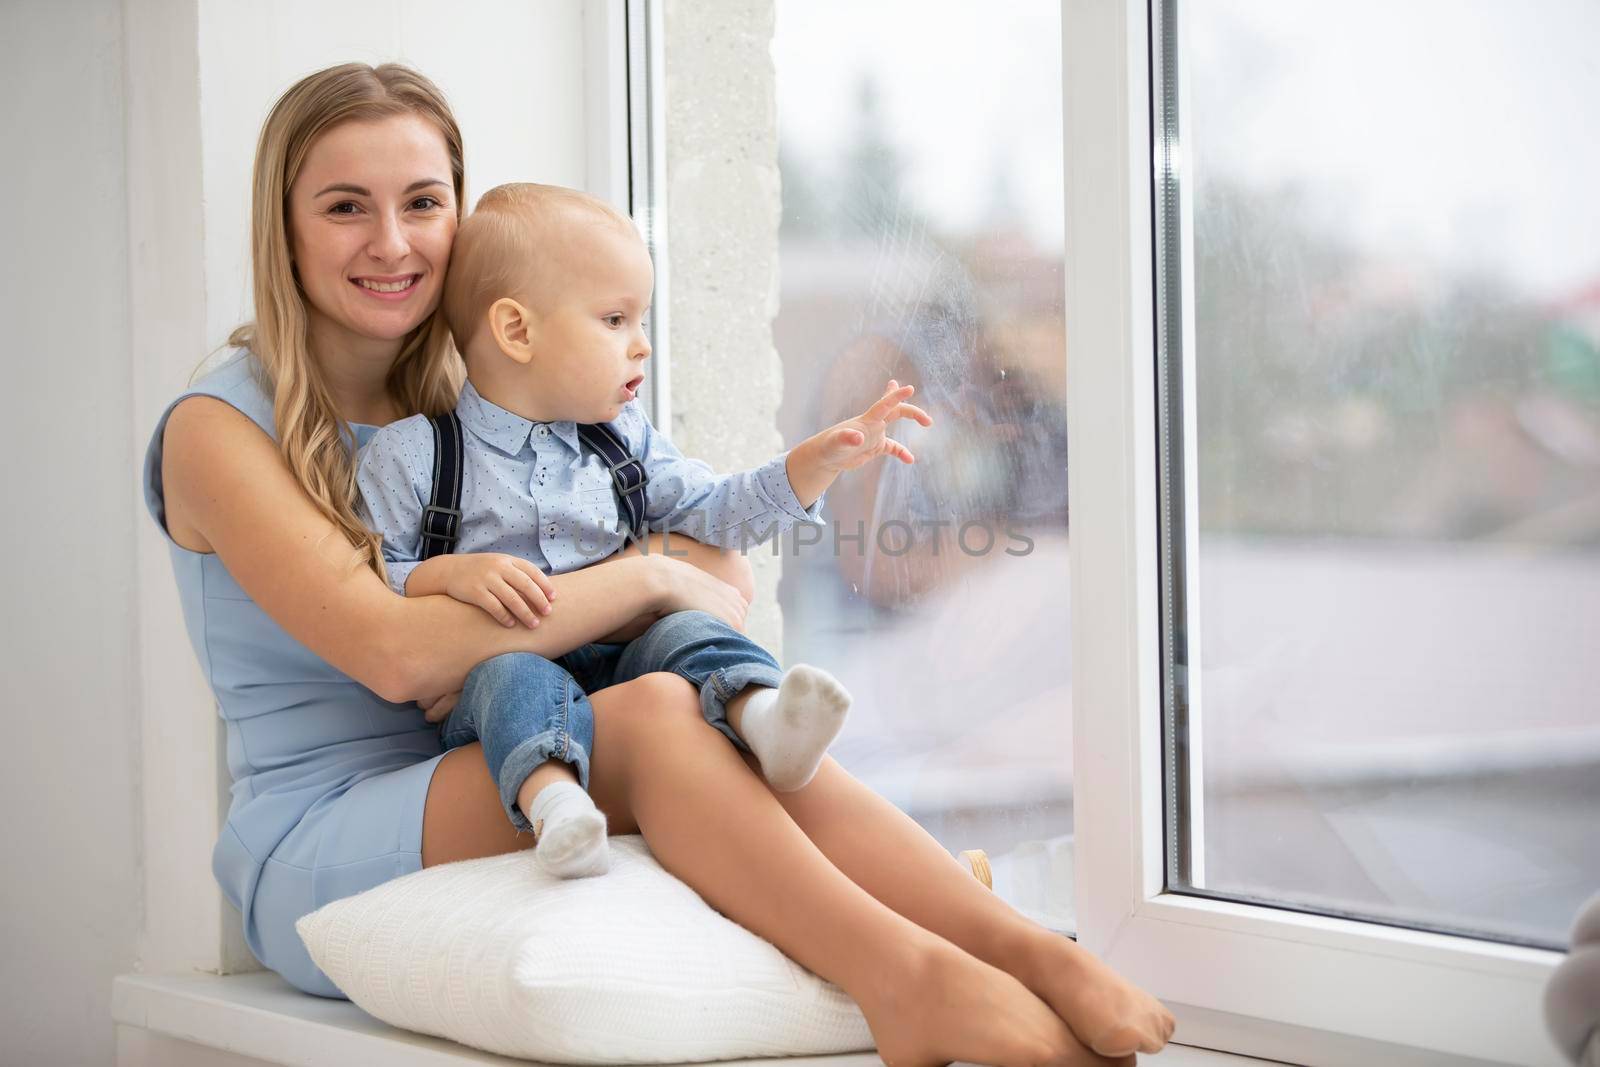 Mom with her son at home near the window.